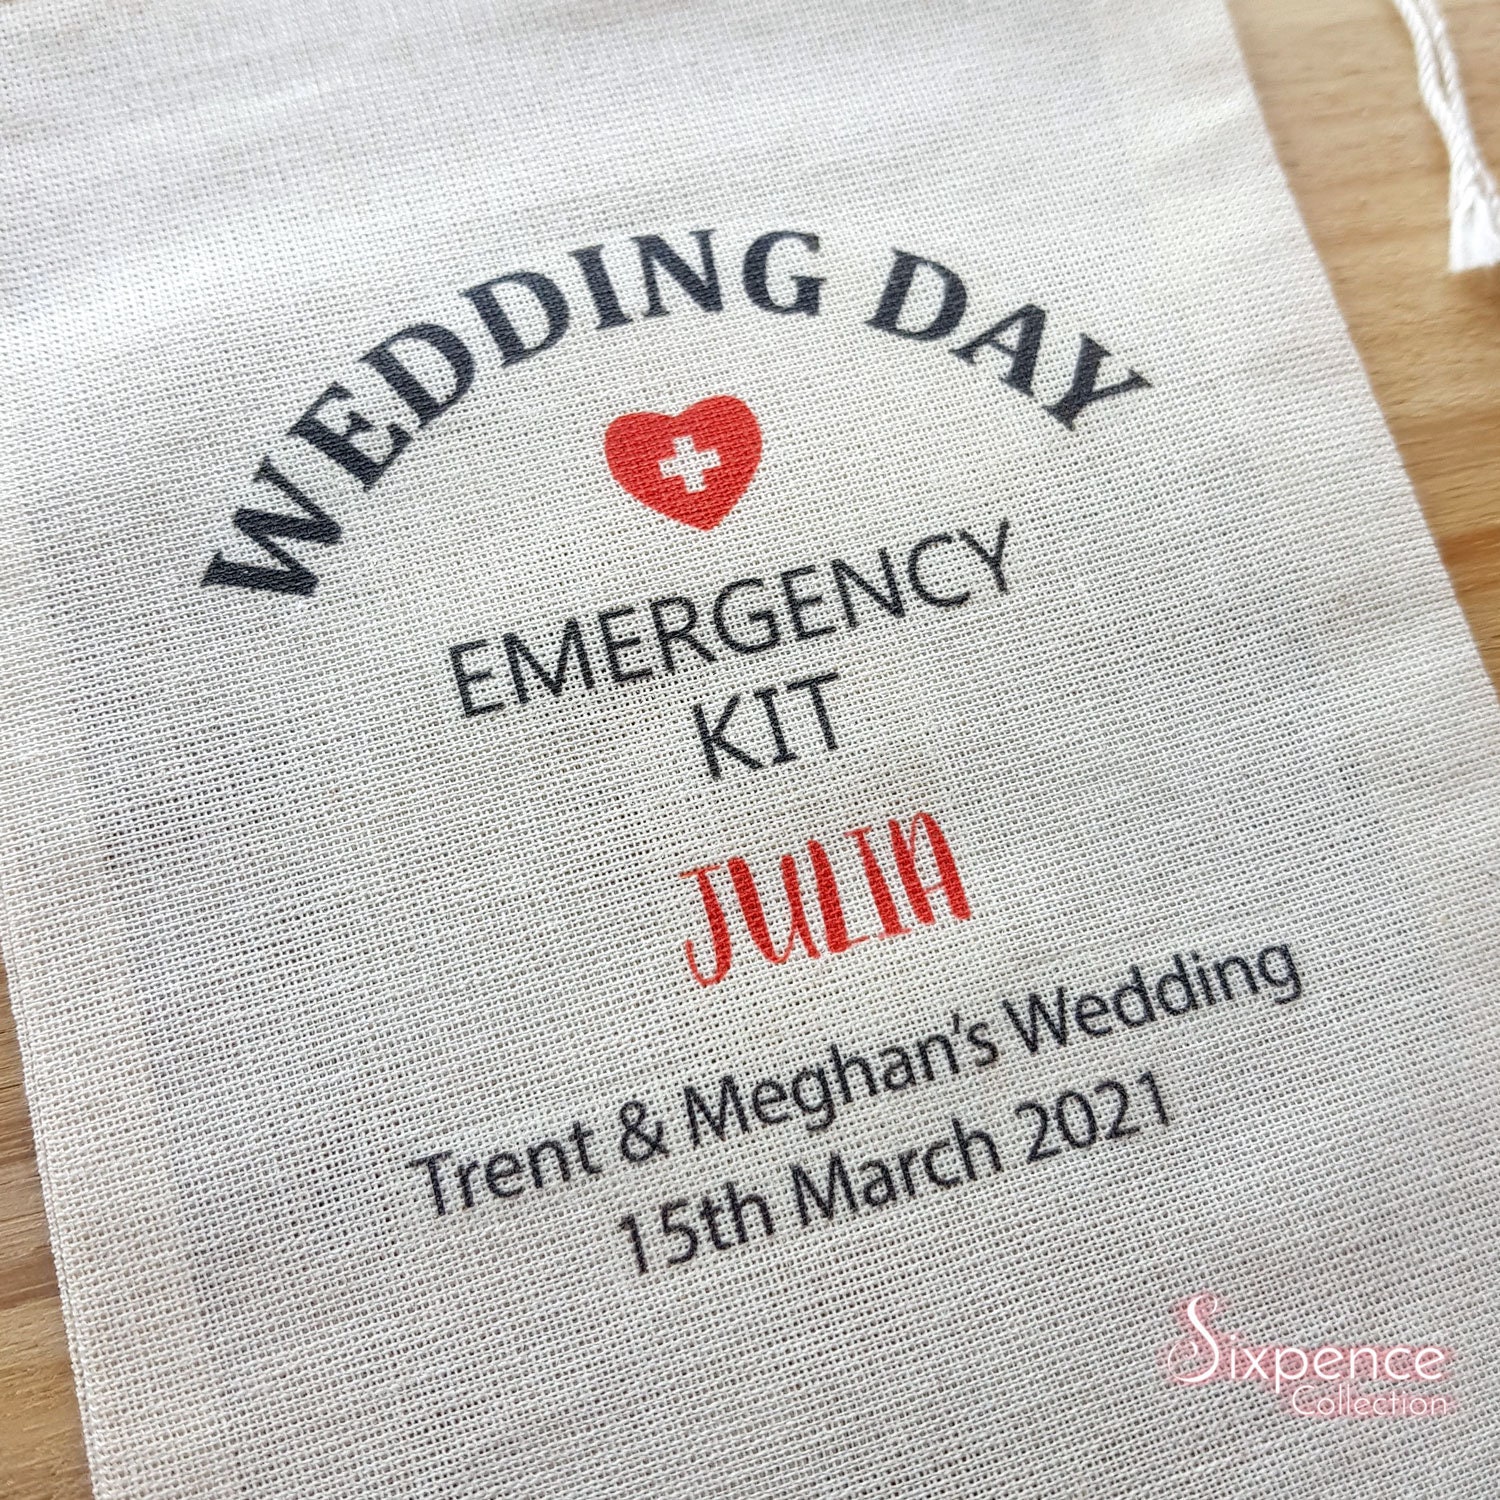 Wedding Day Emergency Kit for Bride Bridal Shower Gift for Travel Cosmetic  Bag Wedding Day Survival Kit Unique Gifts for Sister Besite Best Friend for